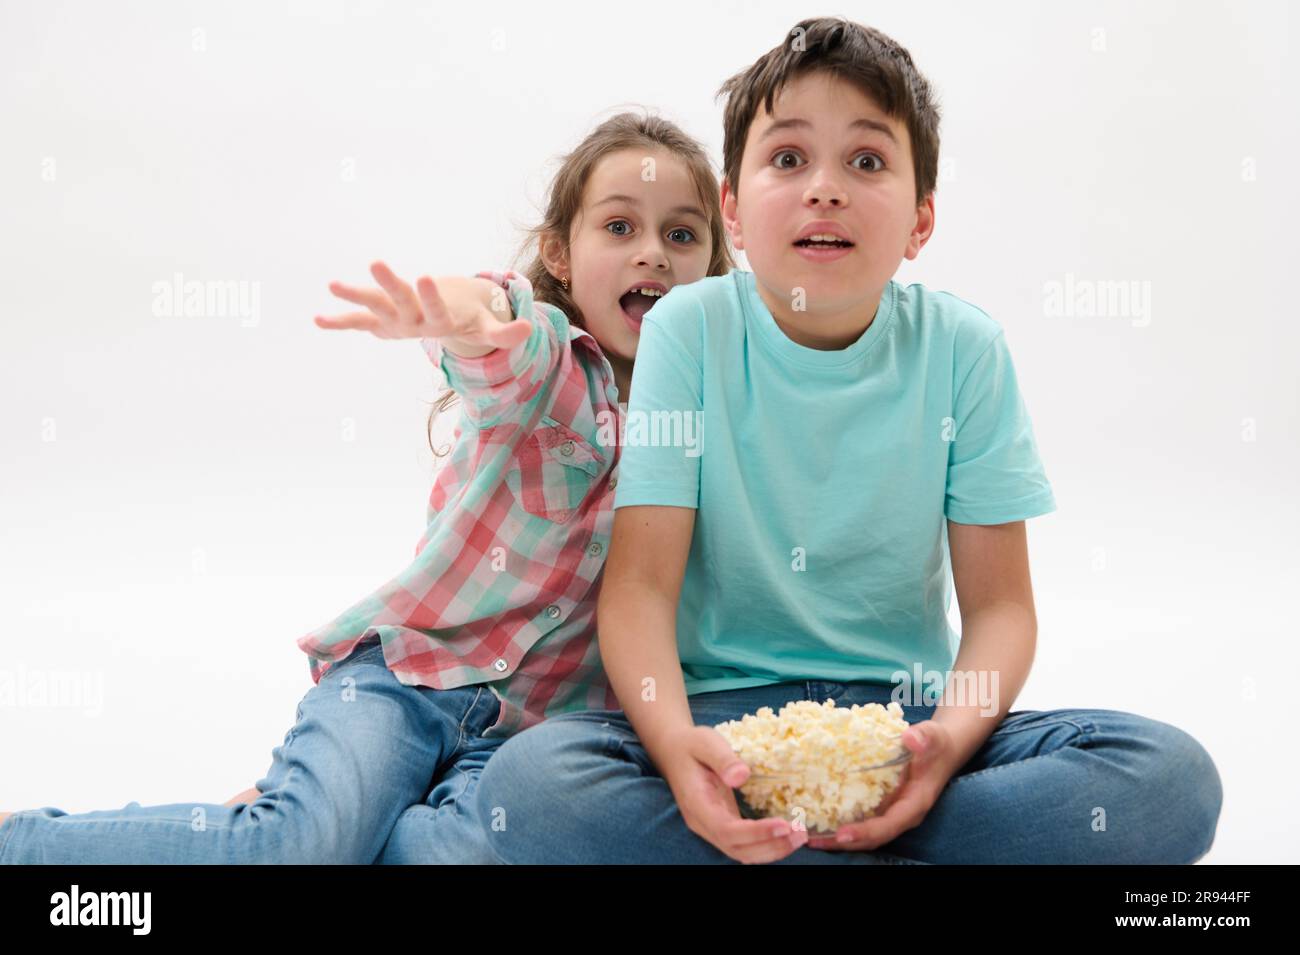 Adorable children with bowl of popcorn, watching scary or fantasy movie, expressing fright and fear on white background Stock Photo